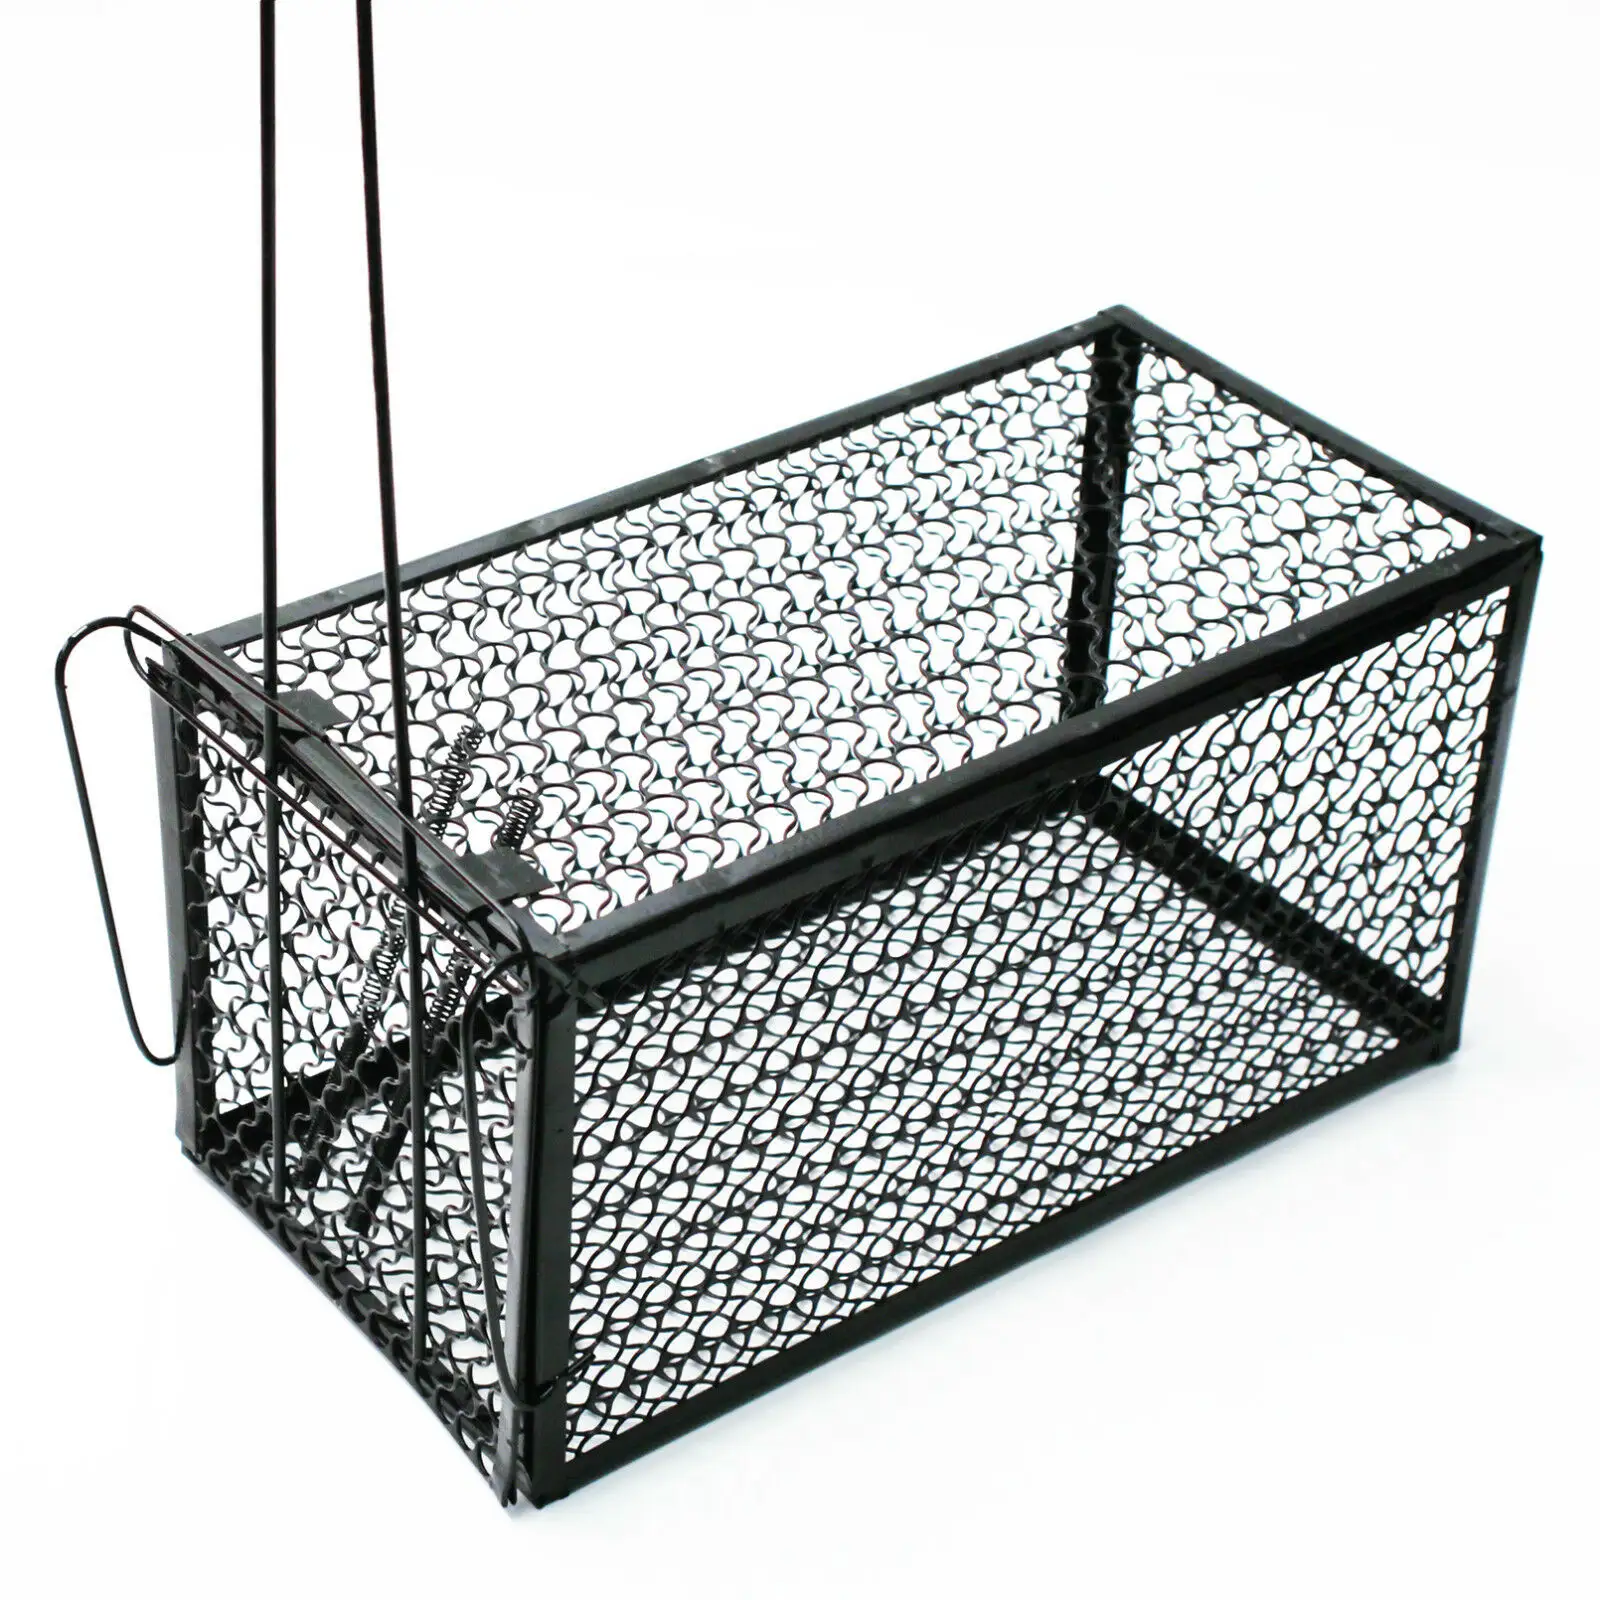 24x12x12cm Small Animal Live Hunting TRAP Catch Alive Survival Mouse Bird Snare käfig